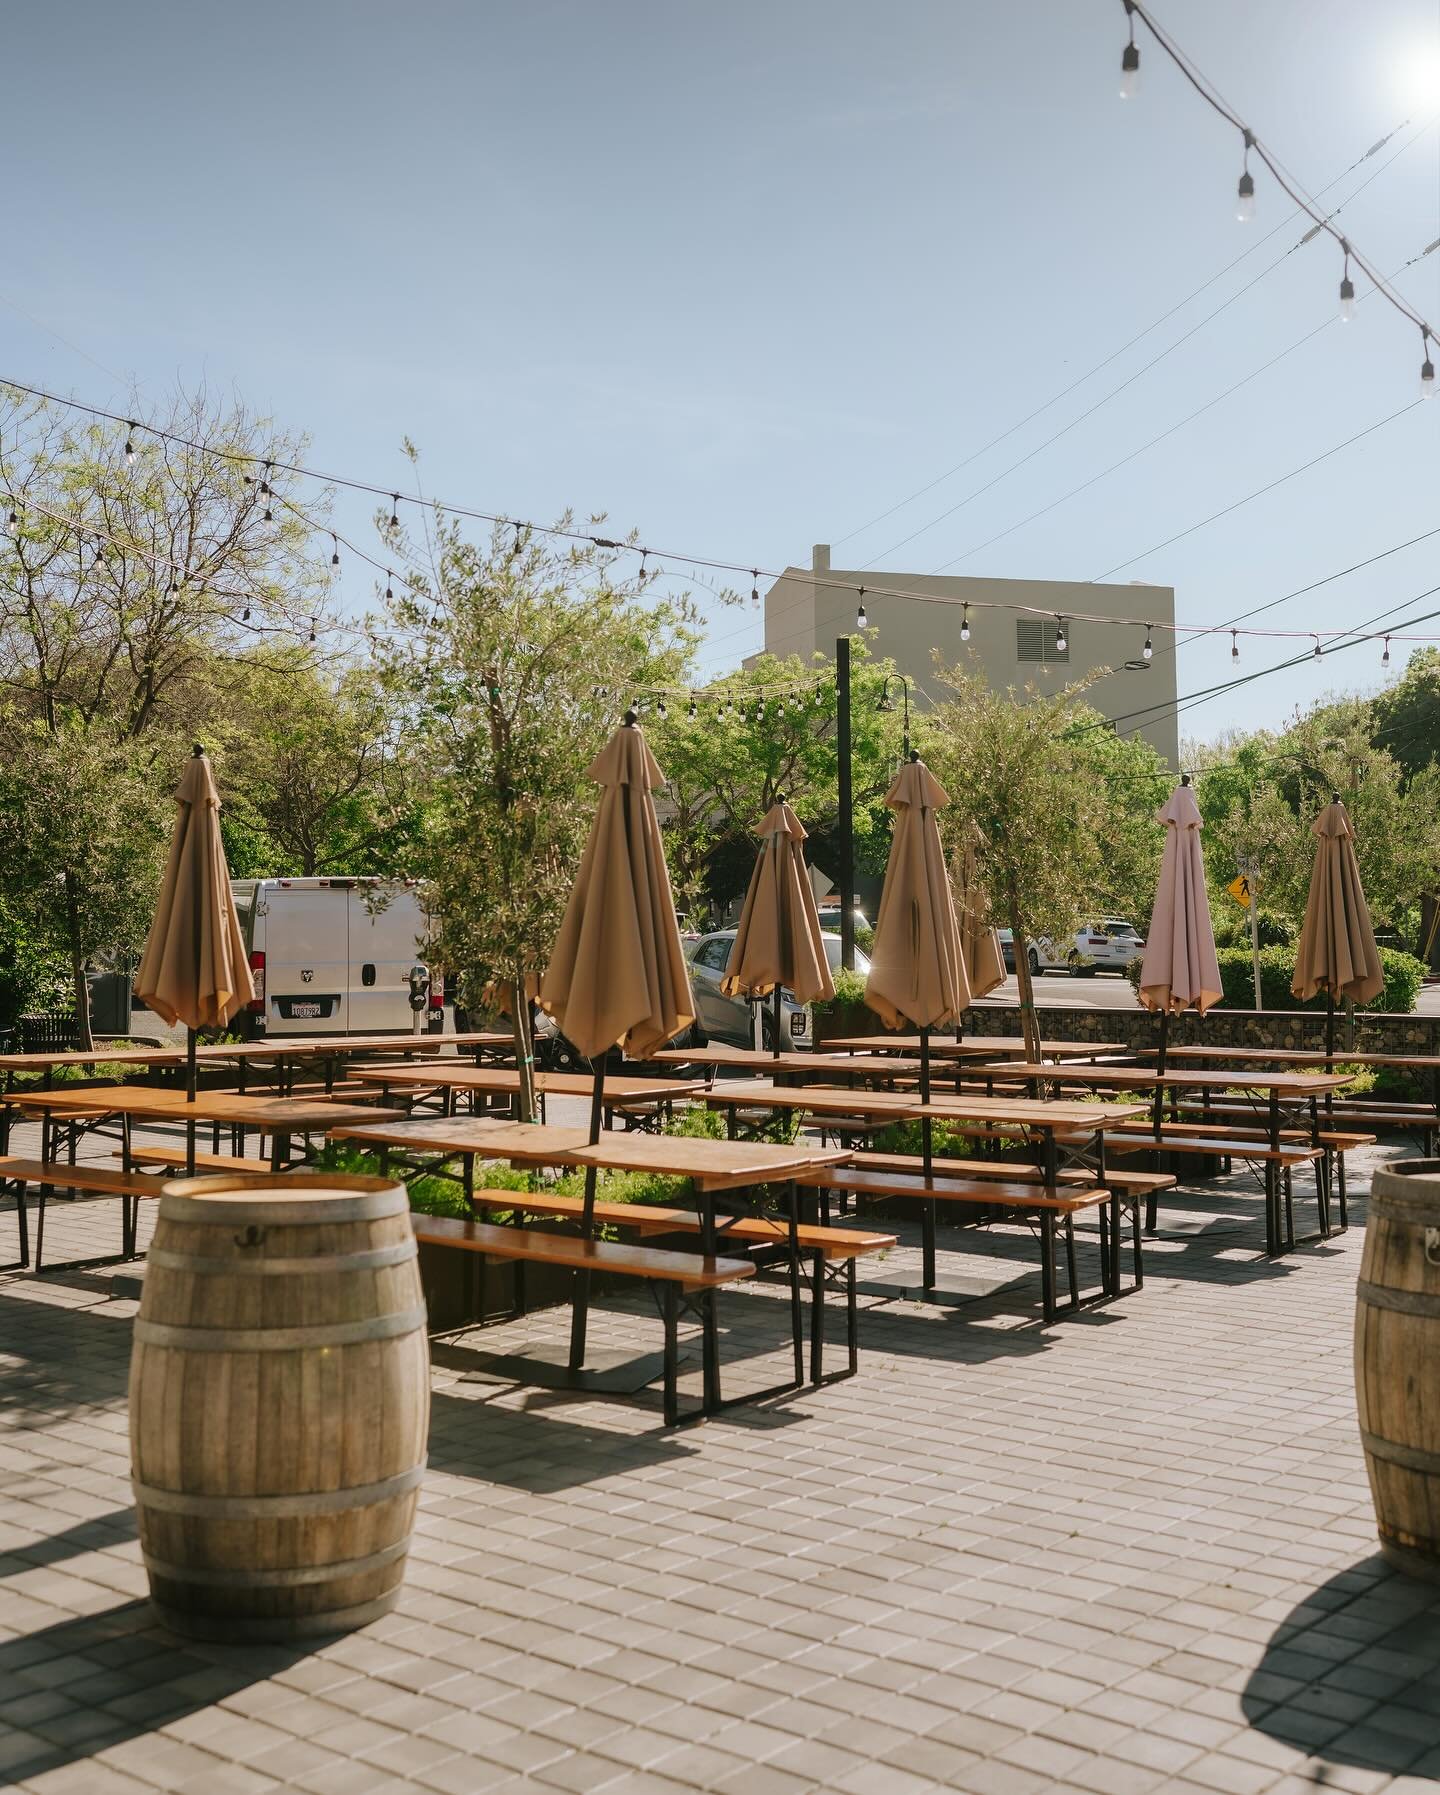 What a beautiful Monday! You know what goes well with some sun rays? BEER! Come on down today from 3 - 8PM to enjoy some brews and the sun shining.